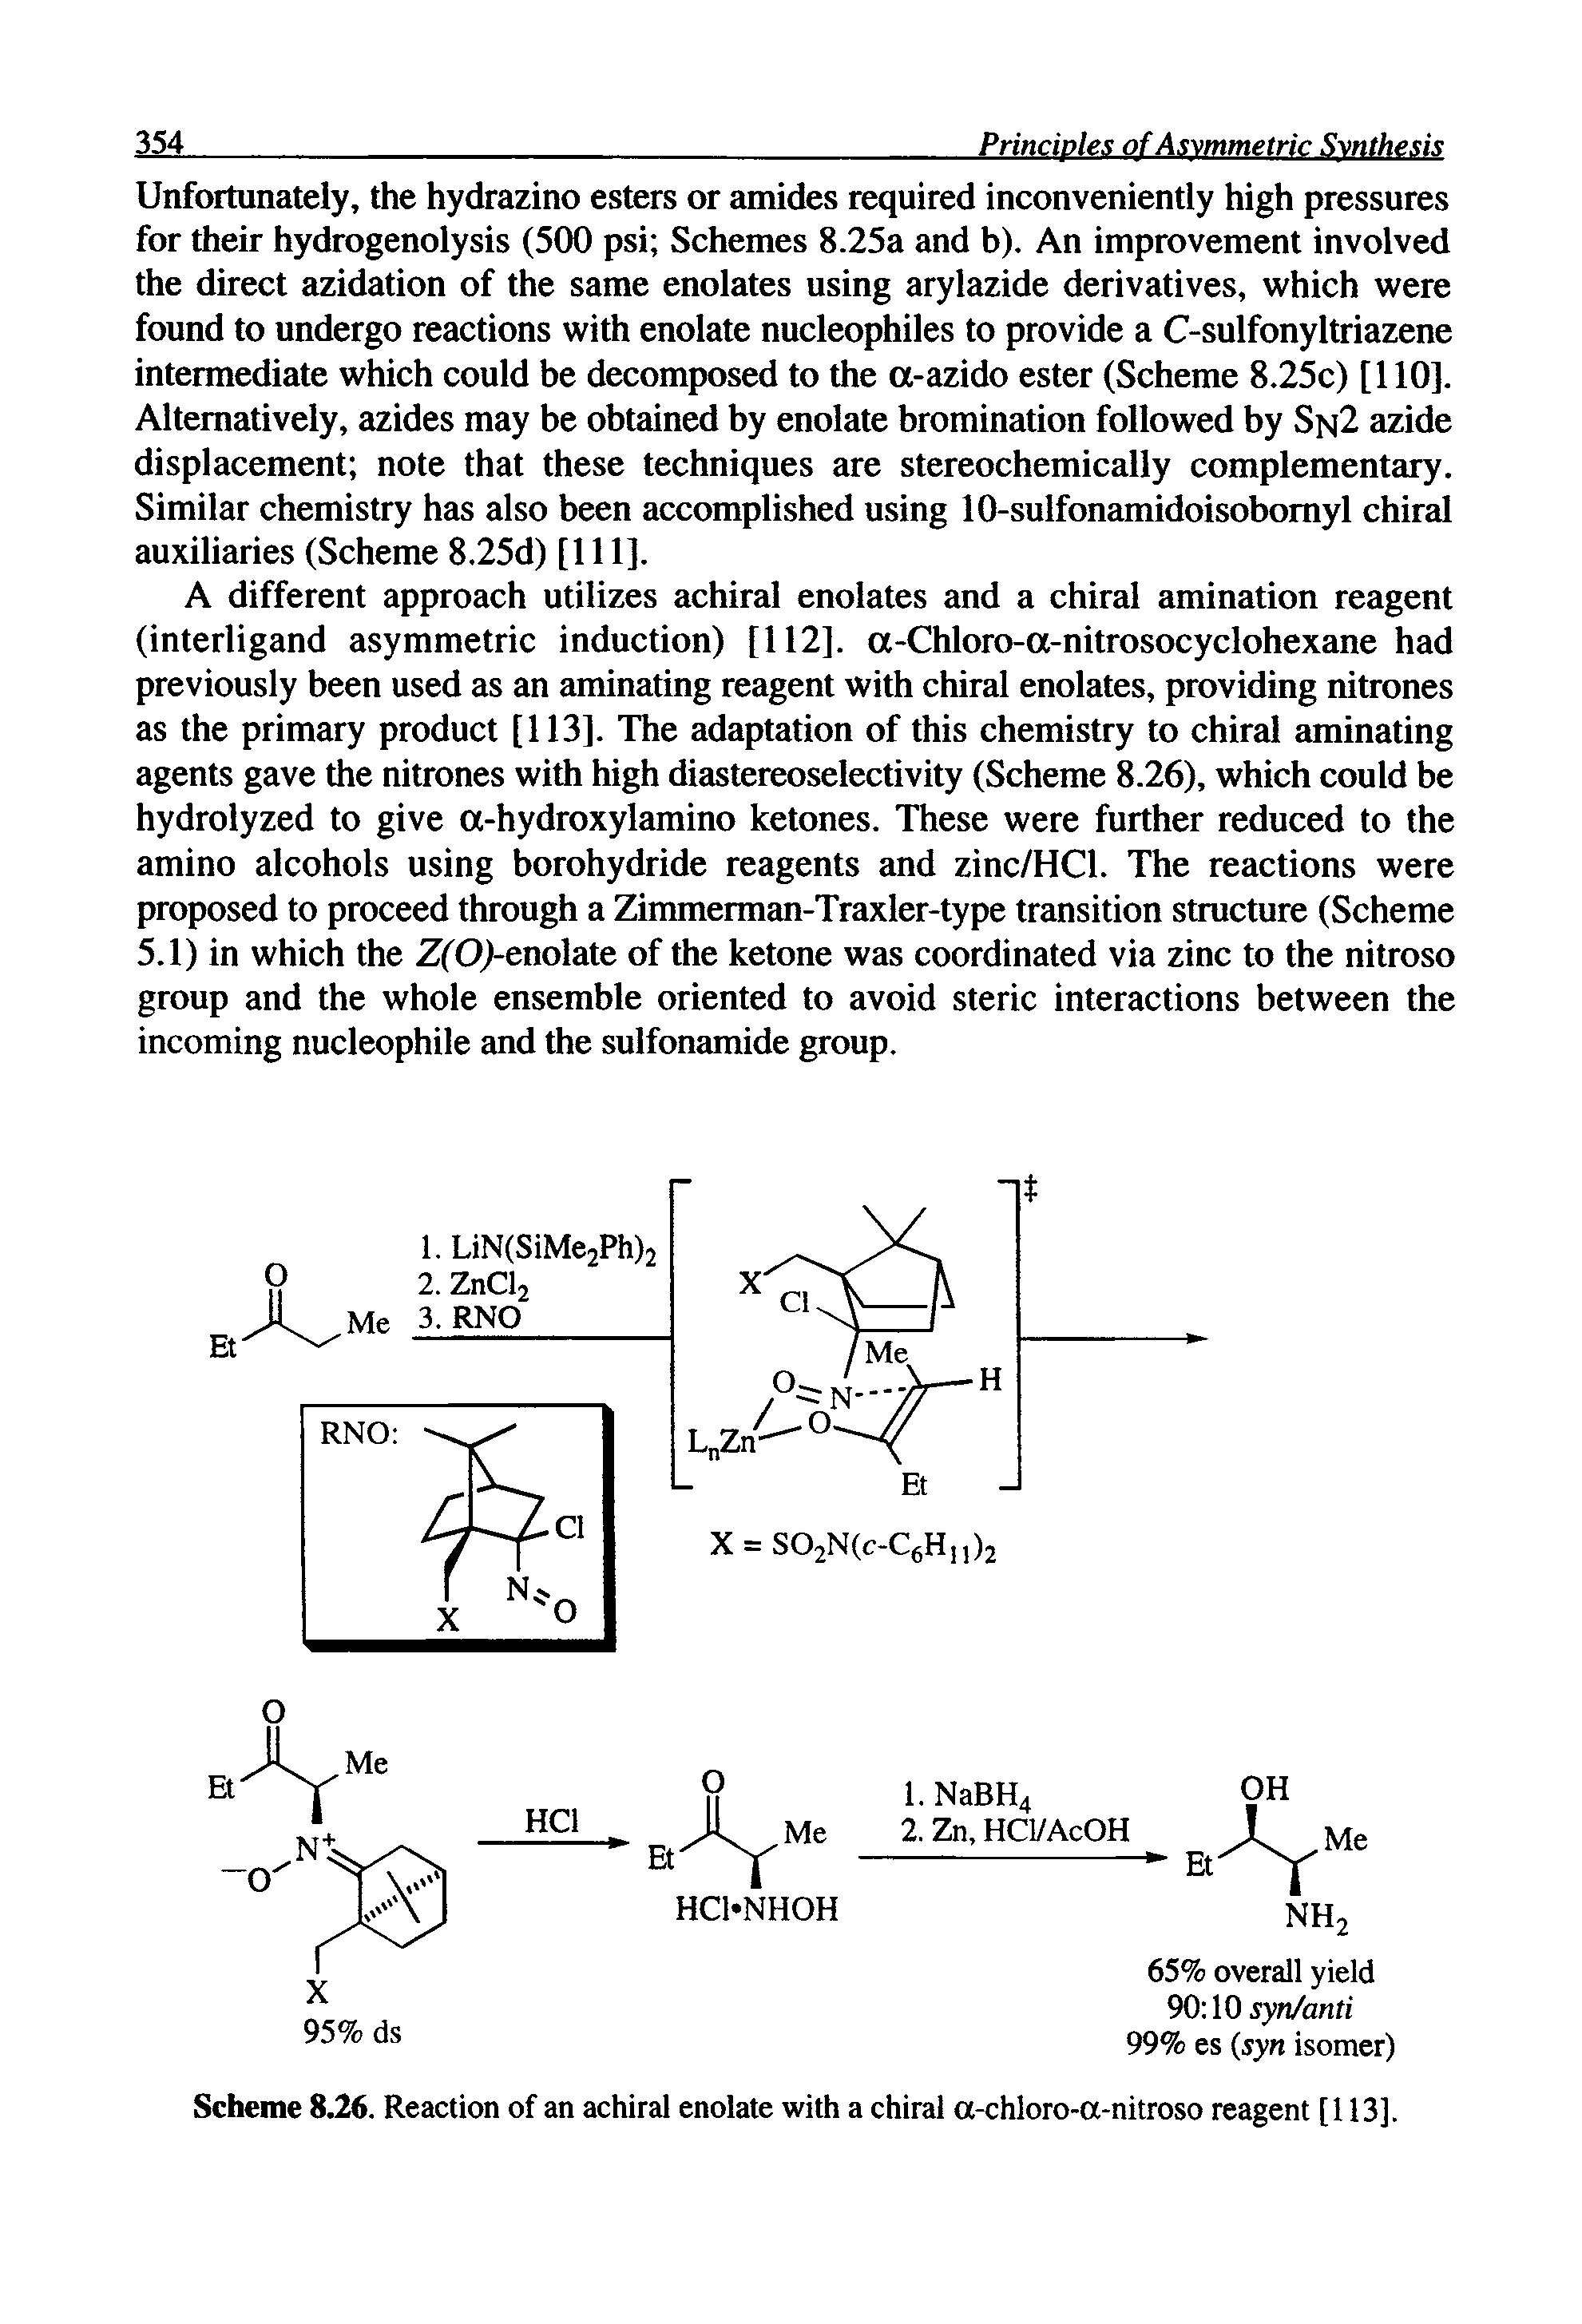 Scheme 8.26. Reaction of an achiral enolate with a chiral a-chloro-a-nitroso reagent [113],...